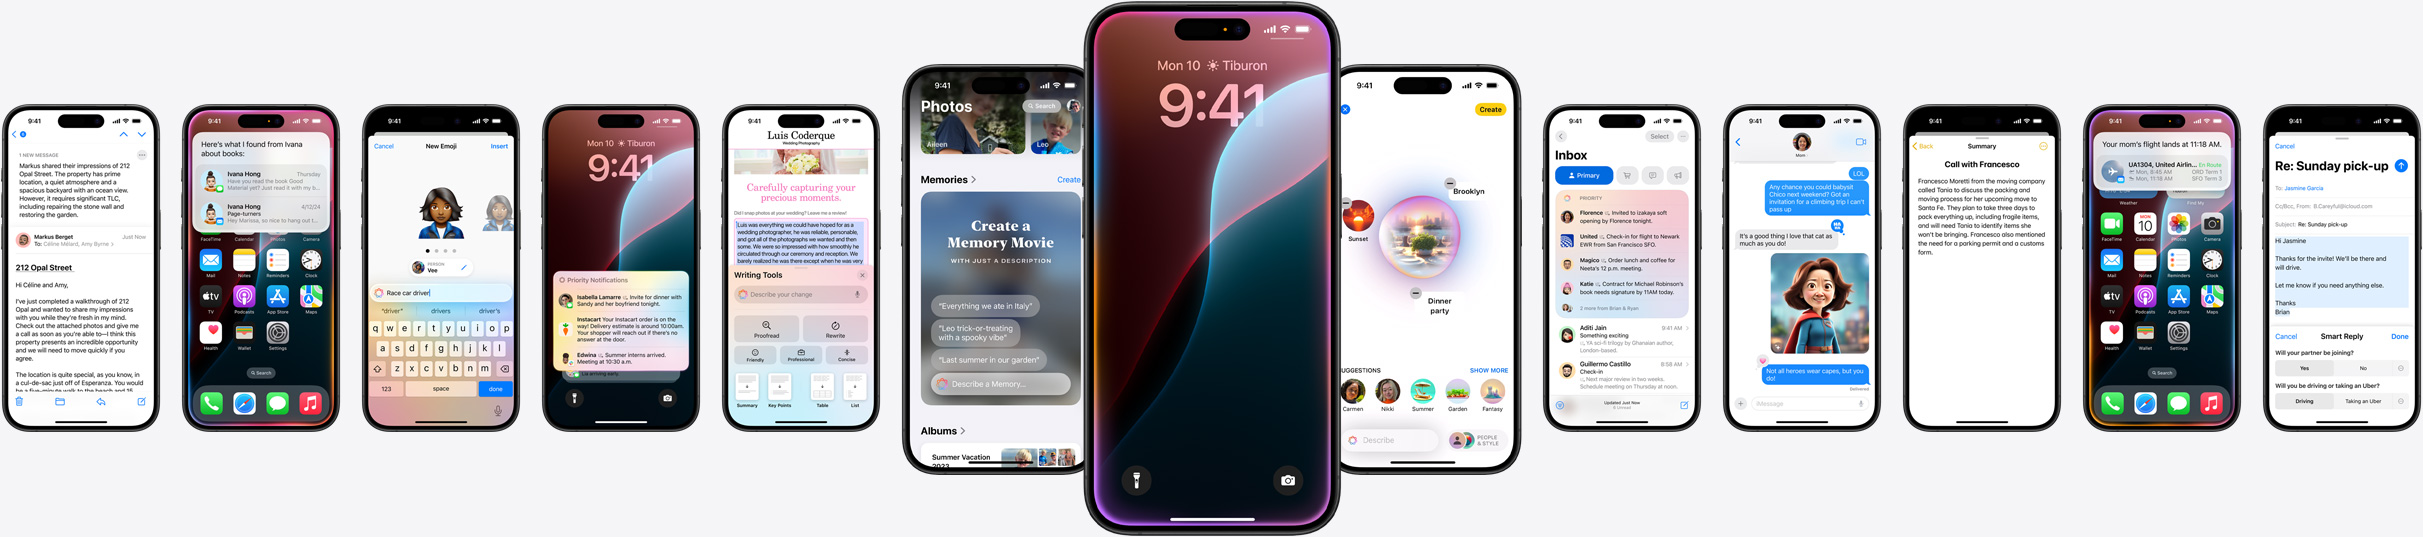 Static image of multiple iPhones showing Apple Intelligence features.